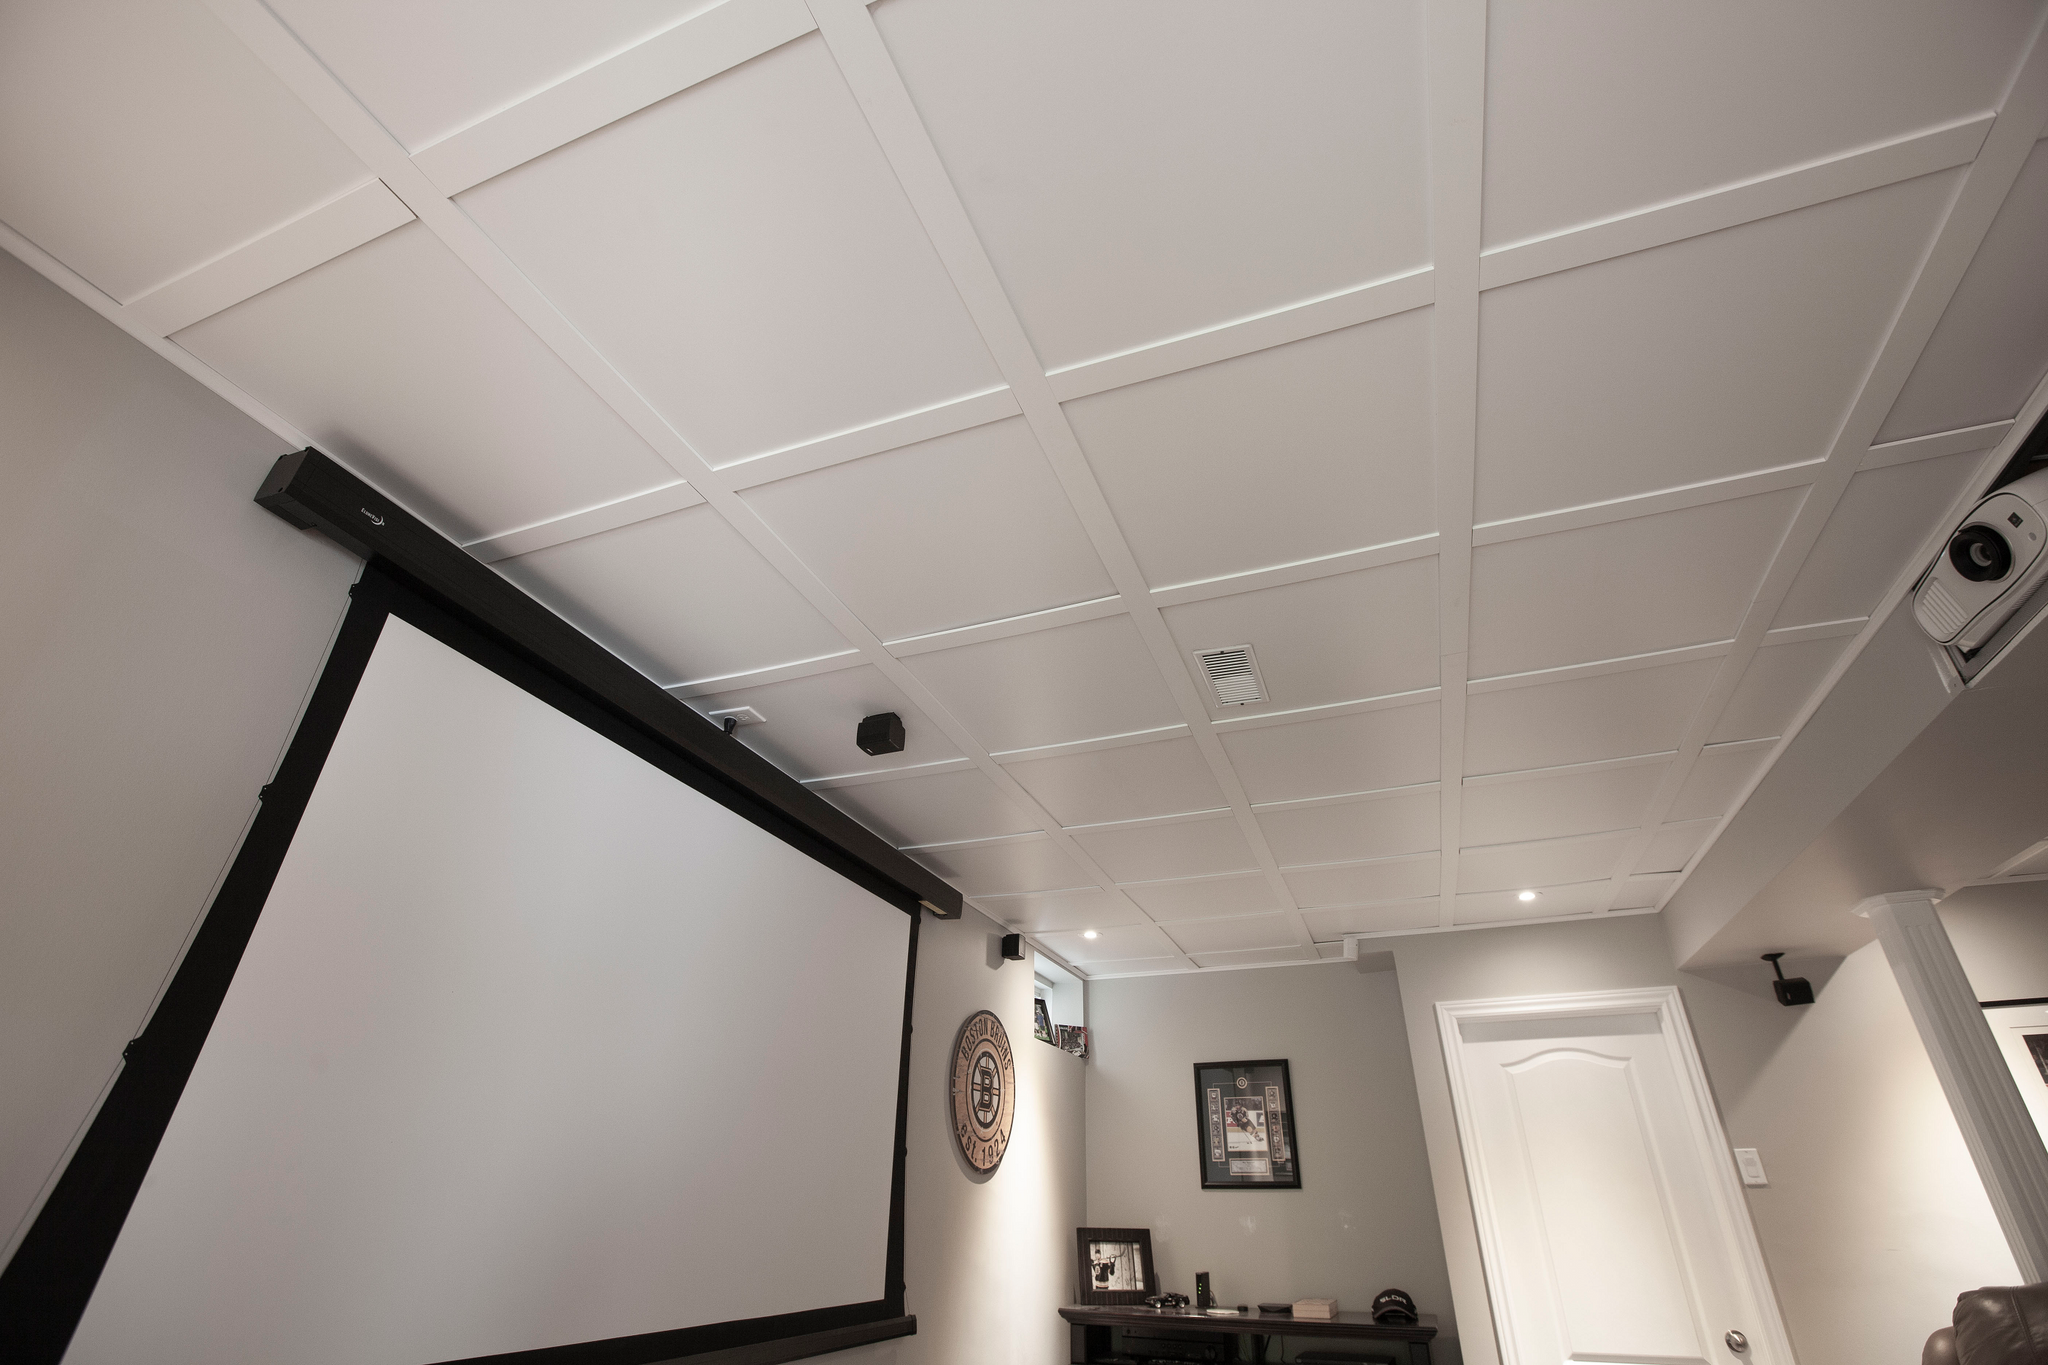 Why choose a suspended ceiling?